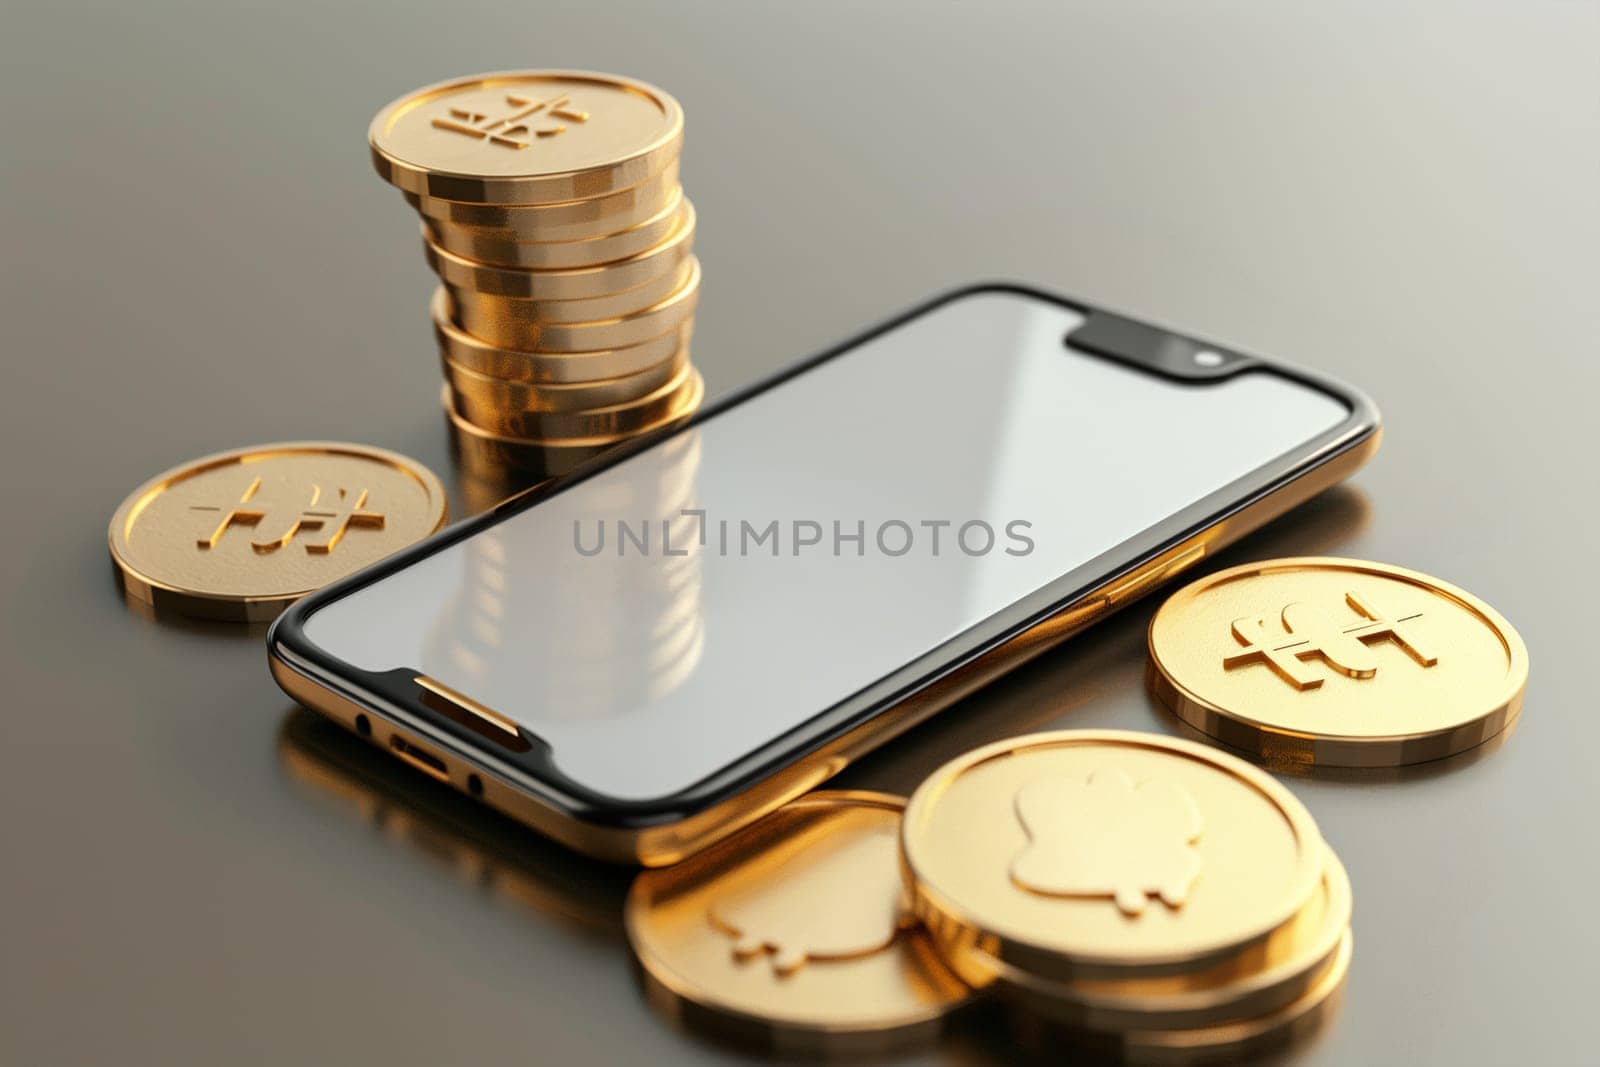 A smartphone lying next to a pile of shining gold coins.